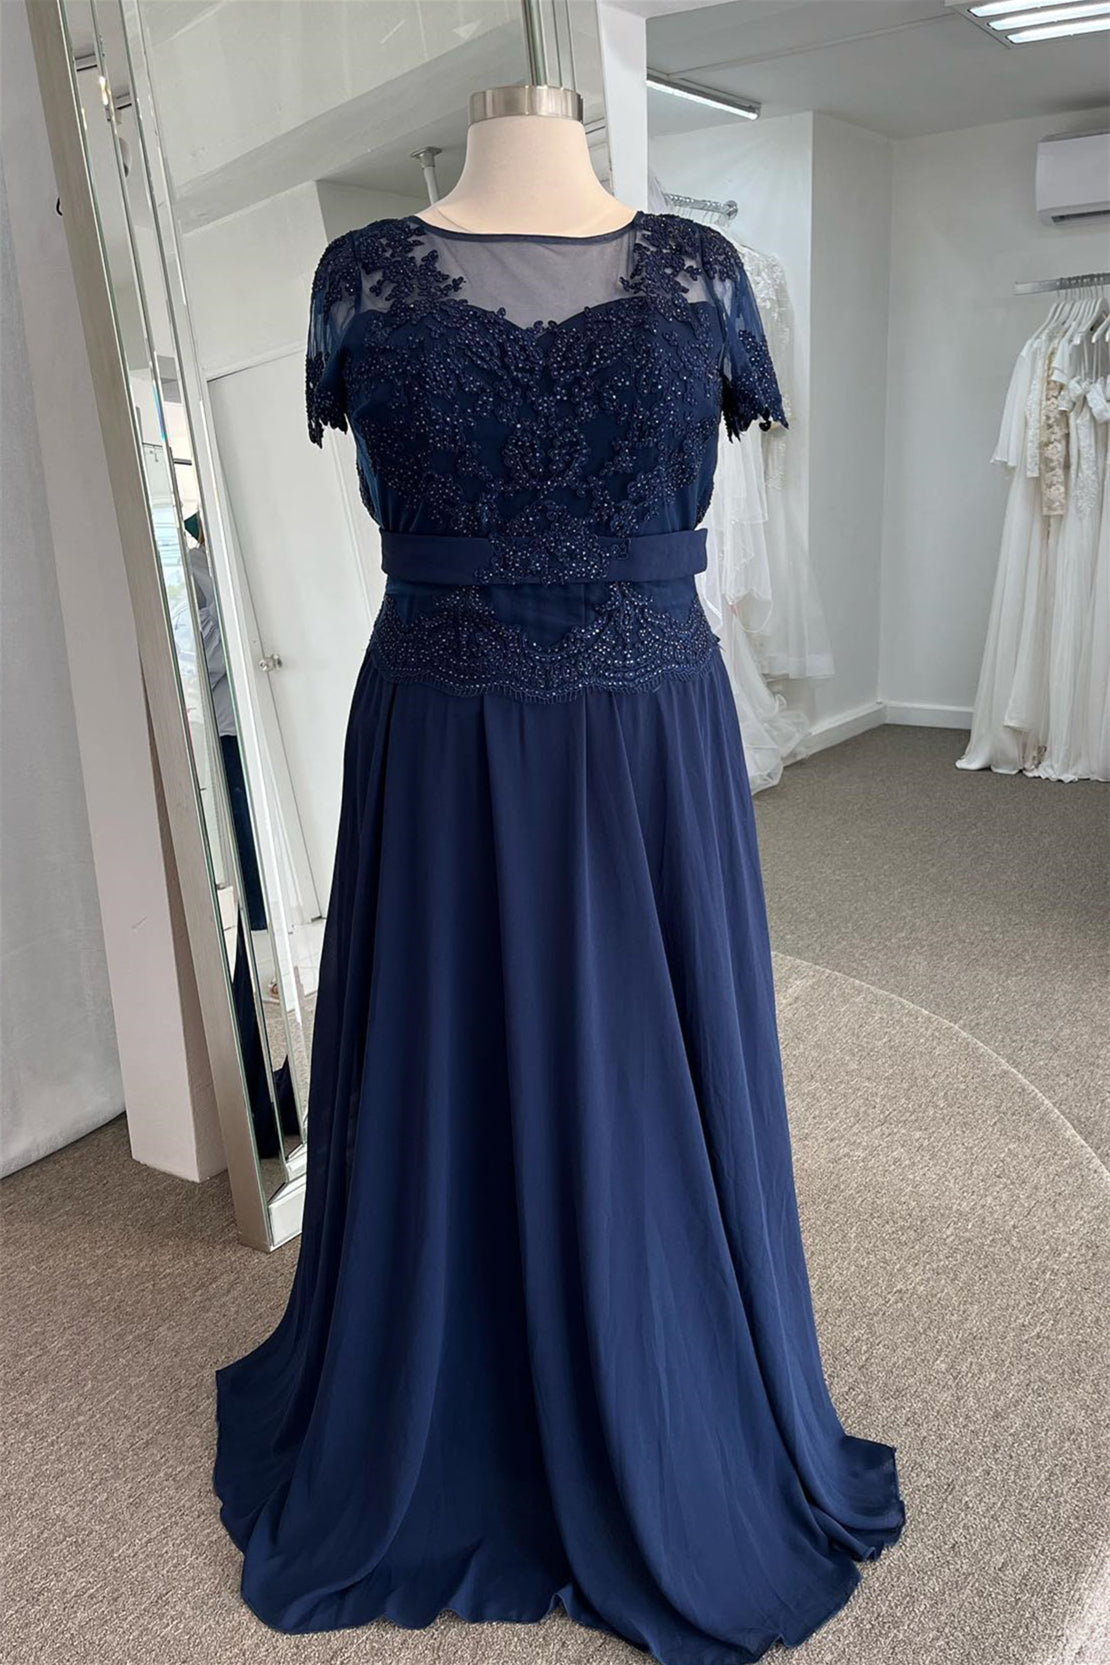 Dark Navy Illusion Neck Sweetheart Sleeves Beaded Appliques Long Formal Dress with Sash